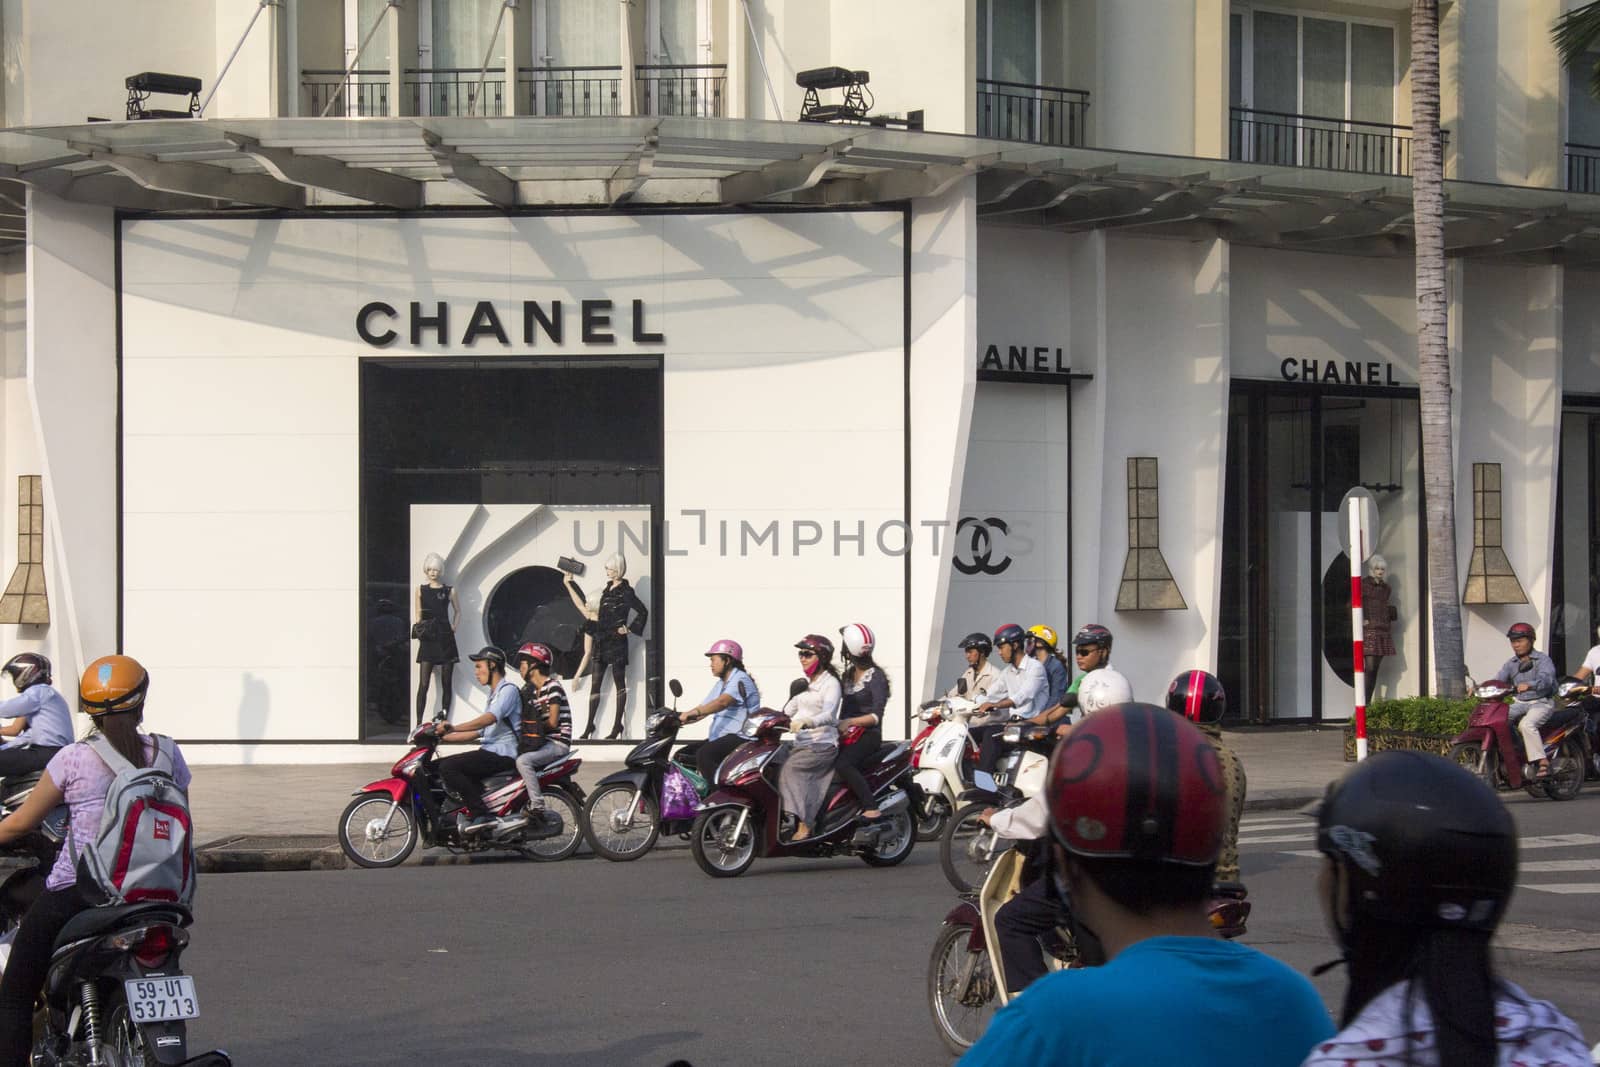 HO CHI MINH CITY, VIETNAM-OCT 29TH: The Chanel store on October 29th 2013. The store located in the Rex hotel arcade is the first Chanel store in Vietnam.